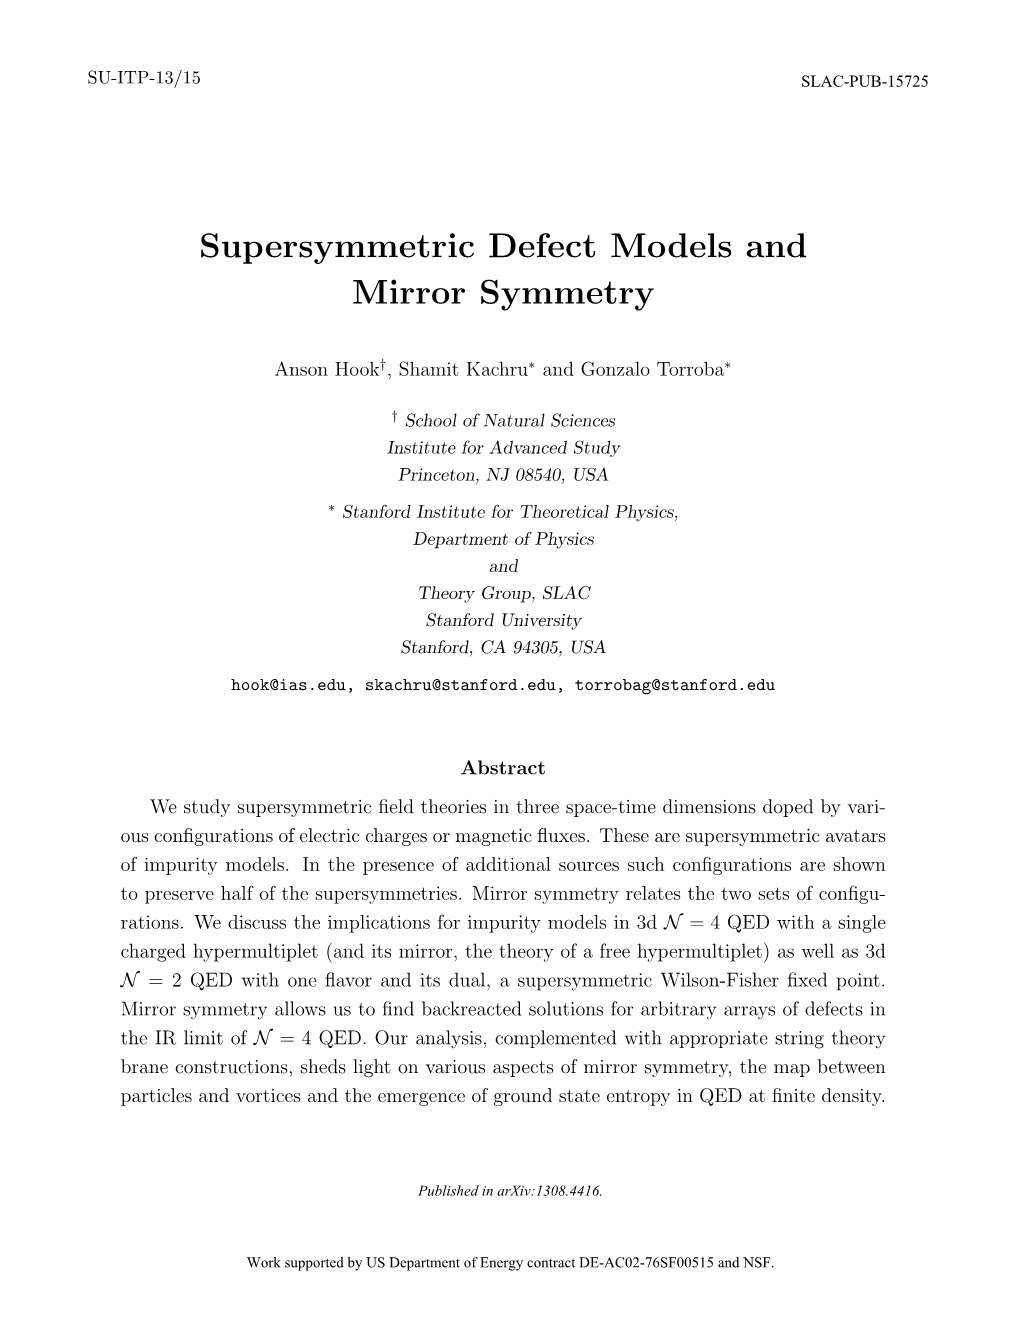 Supersymmetric Defect Models and Mirror Symmetry